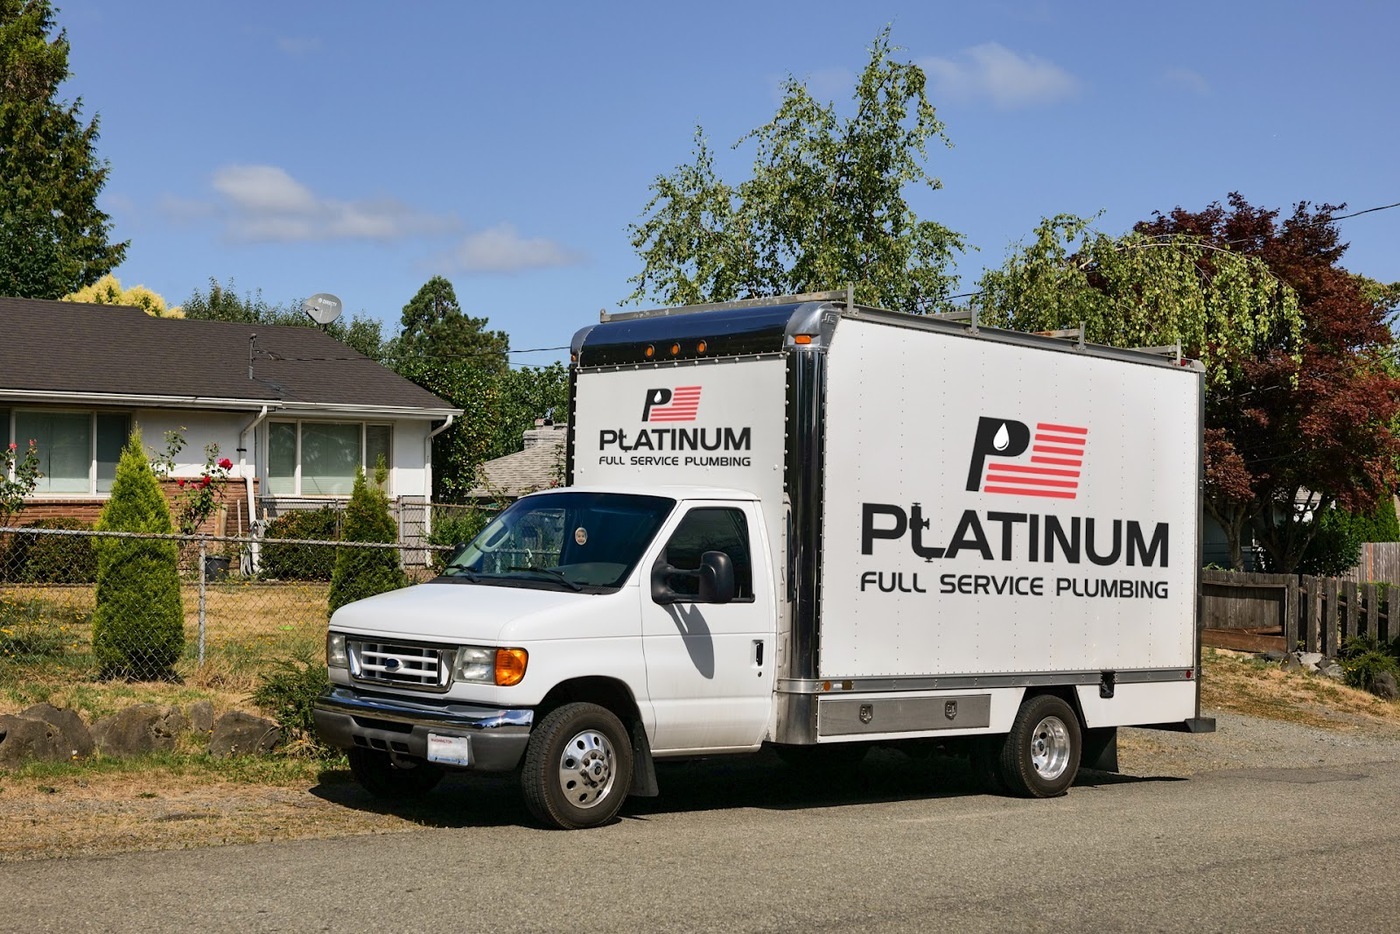 Platinum Full Service Plumbing specializes in all kinds of residential and commercial plumbing services, including water heater repairs, faucet repairs, water pressure and water line repairs, sewer repairs, gas line repairs, toilet repairs, faucet repairs, and clearing clogged drains.